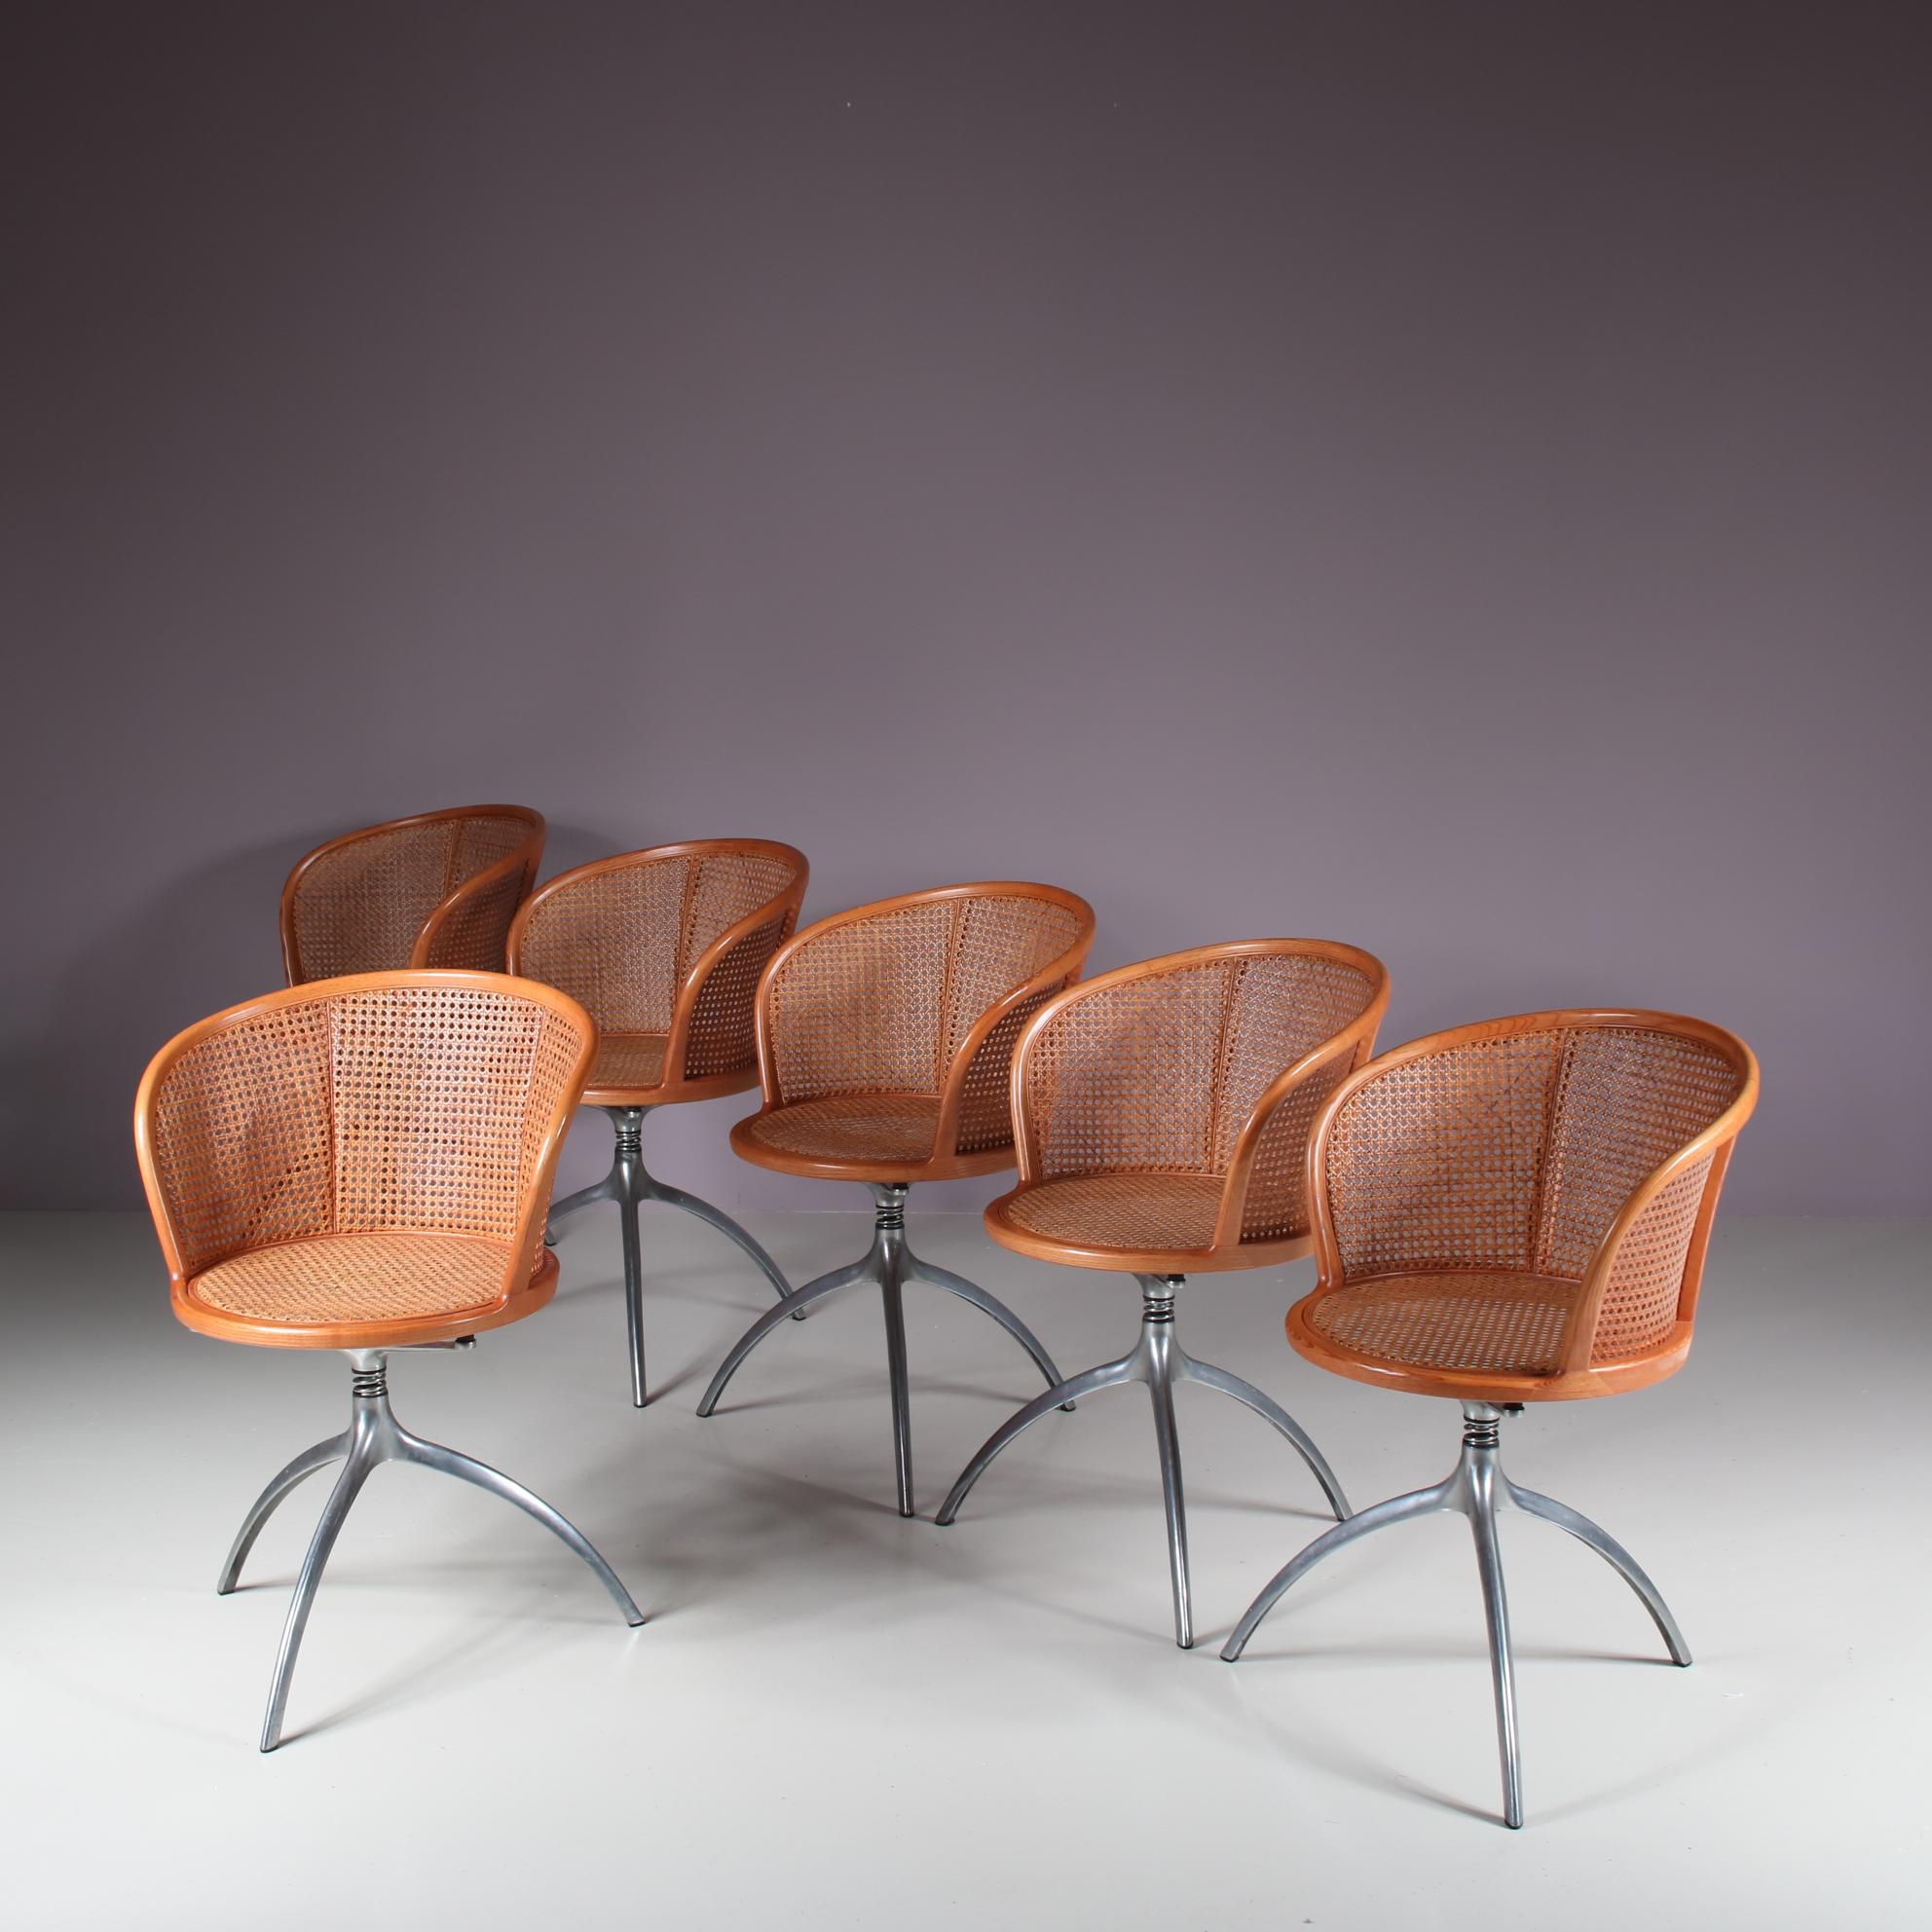 A fantastic set of six chairs, model 901 also known as the “Young Lady” chairs, designed by Paolo Rizzato and manufactured by Alias in Italy 1990.

These eye-catching chairs have three legged chrome plated metal frames in a beautiful elegant shape.